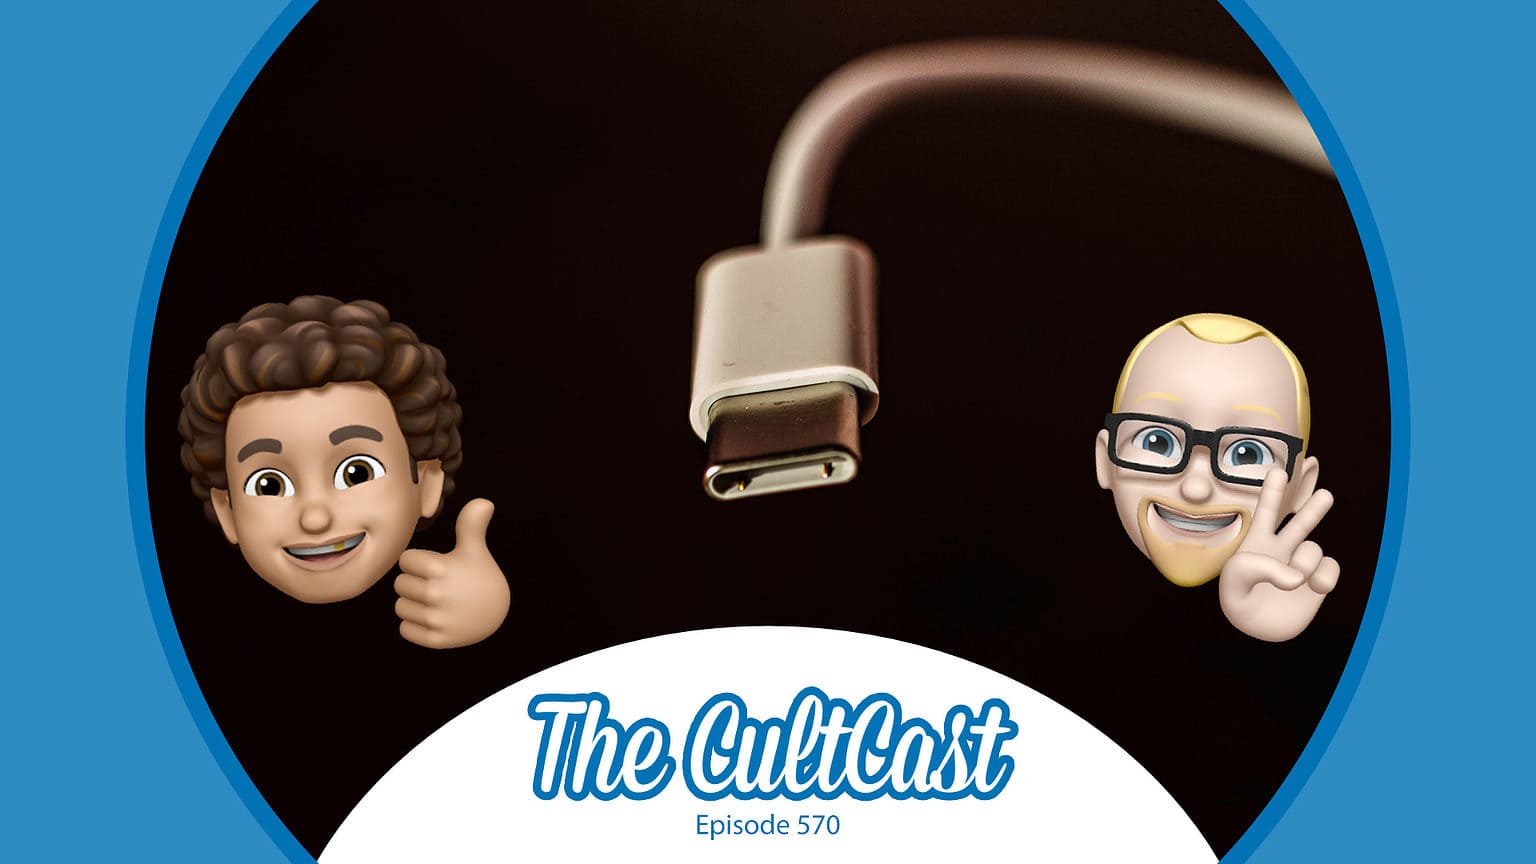 The CultCast Apple podcast: iPhone 15 rumors: Coming soon to an iPhone near you?